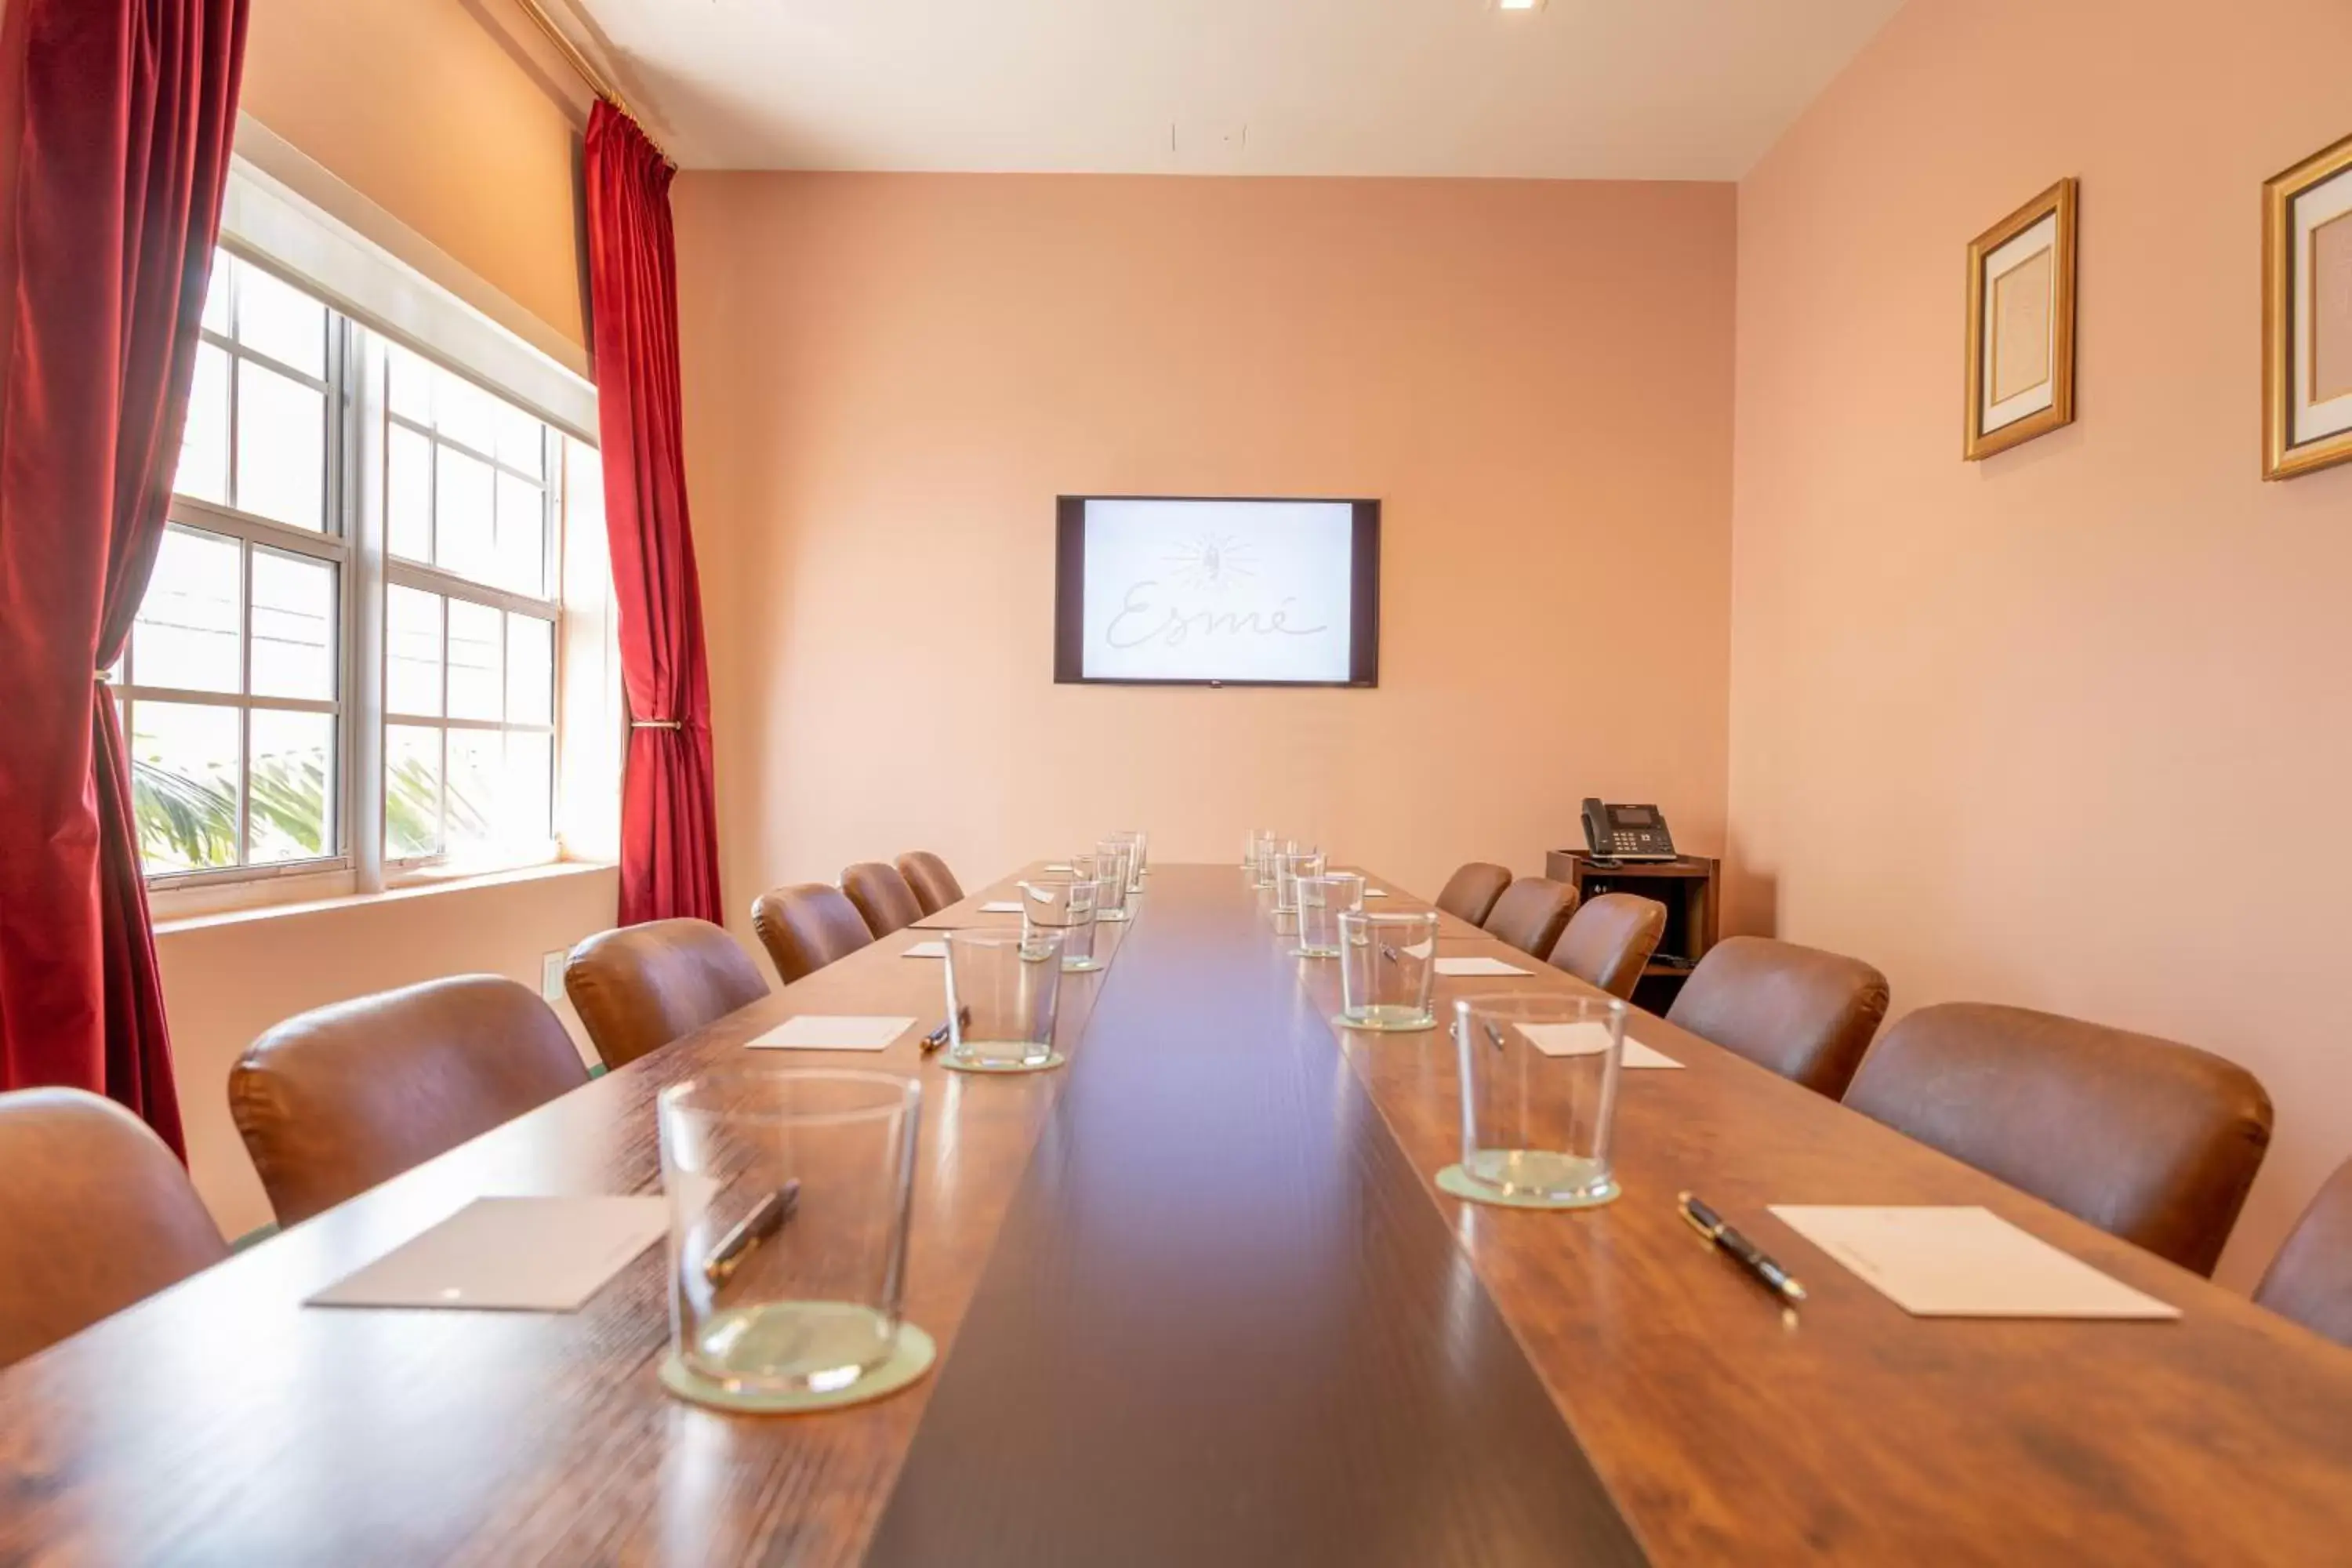 Meeting/conference room in Esme Miami Beach